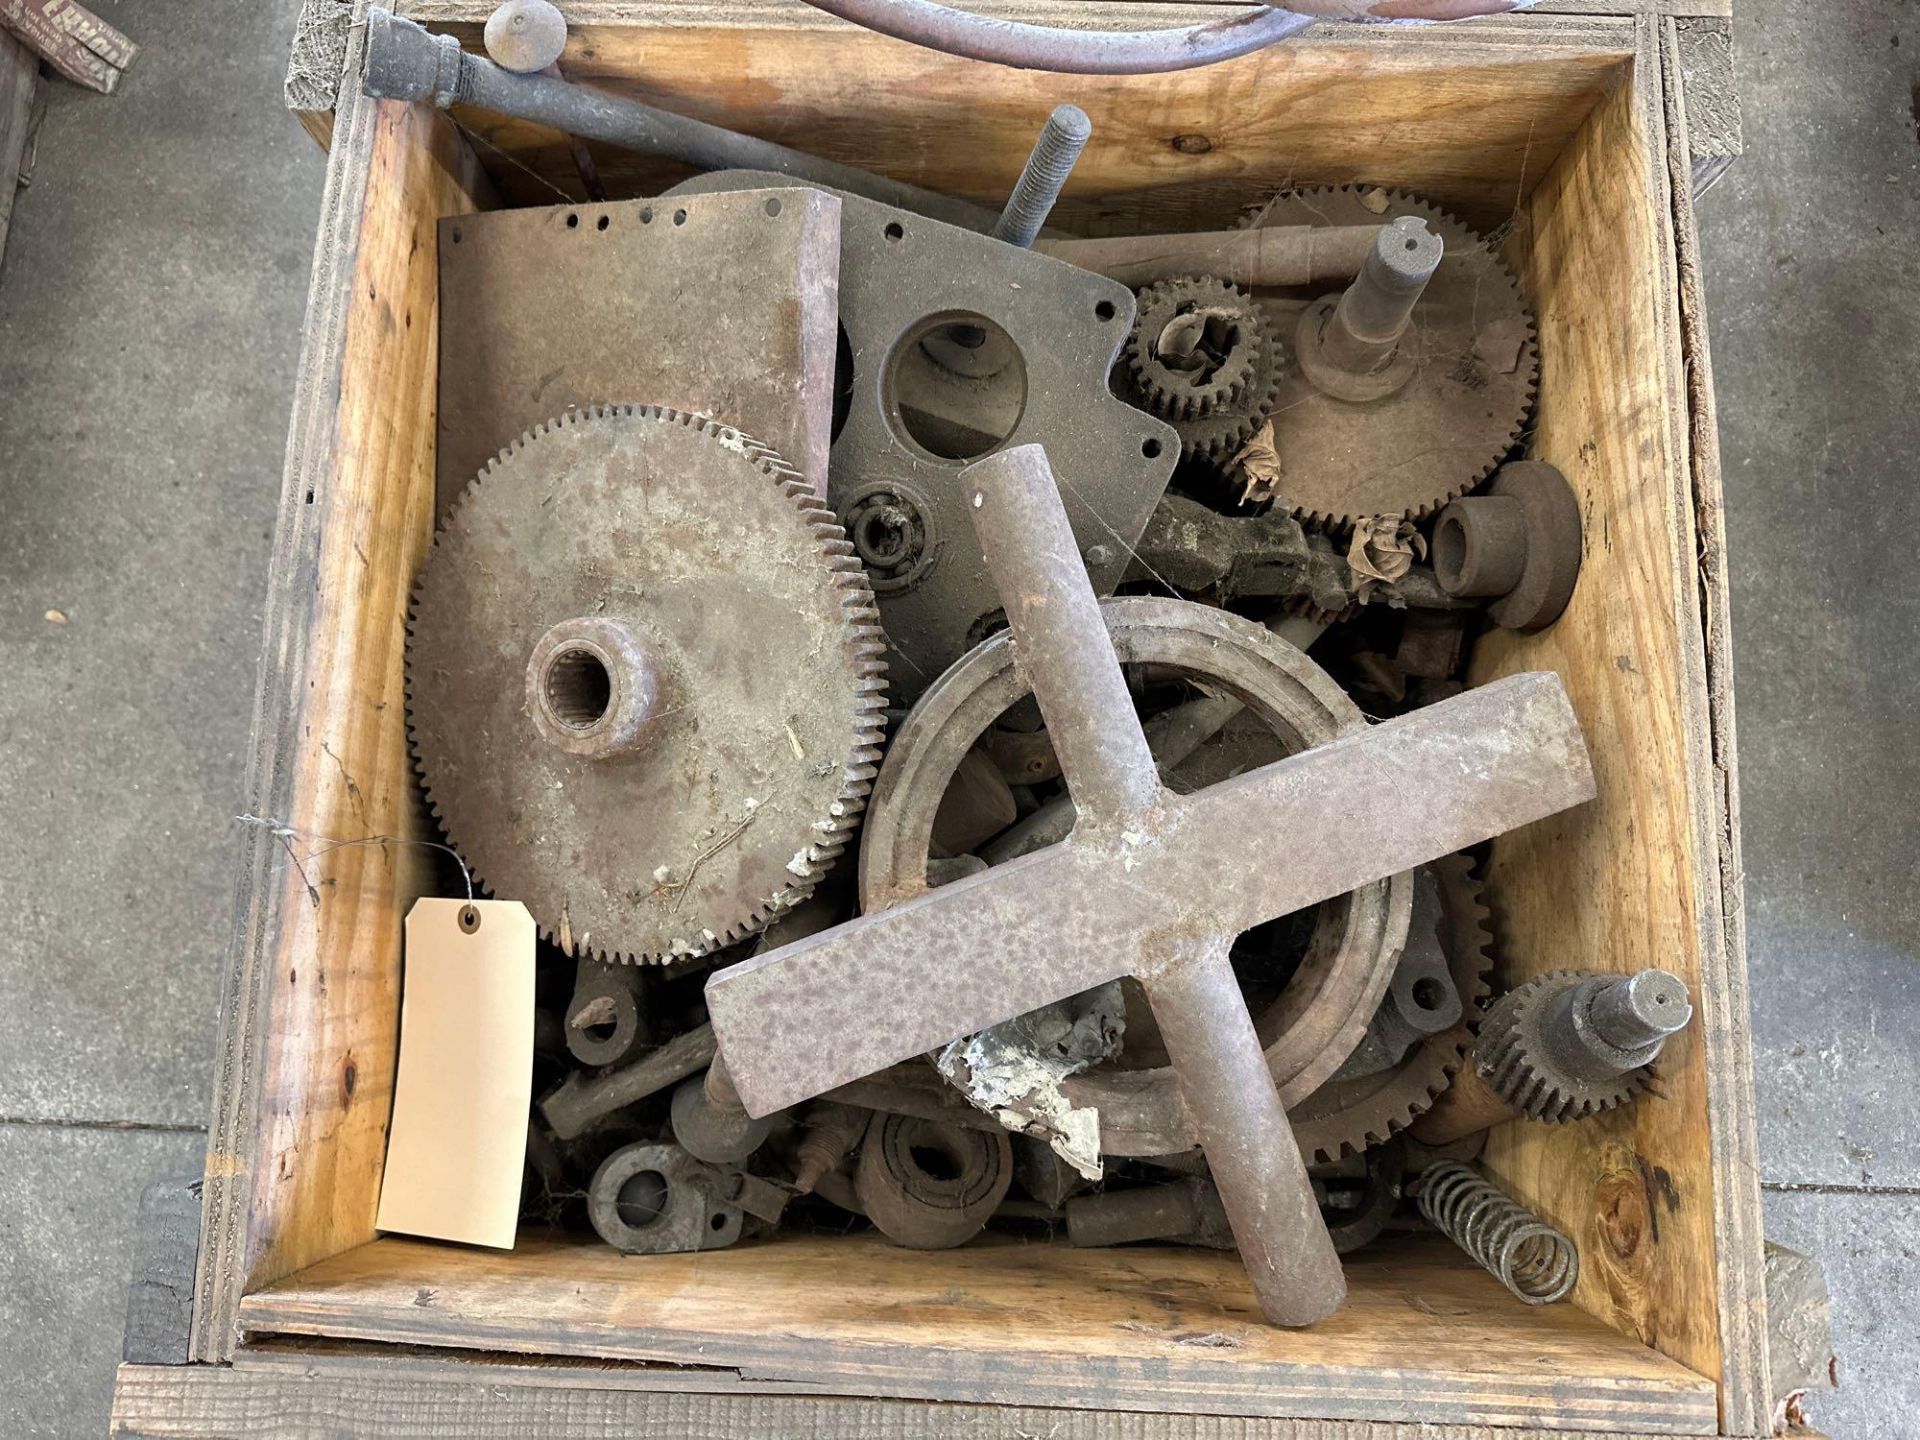 Lot of 14 Pallets of Axelson Parts: Motors, Gear Boxes, Steady Rests, Tail Stocks, Electrical Cabine - Image 11 of 31